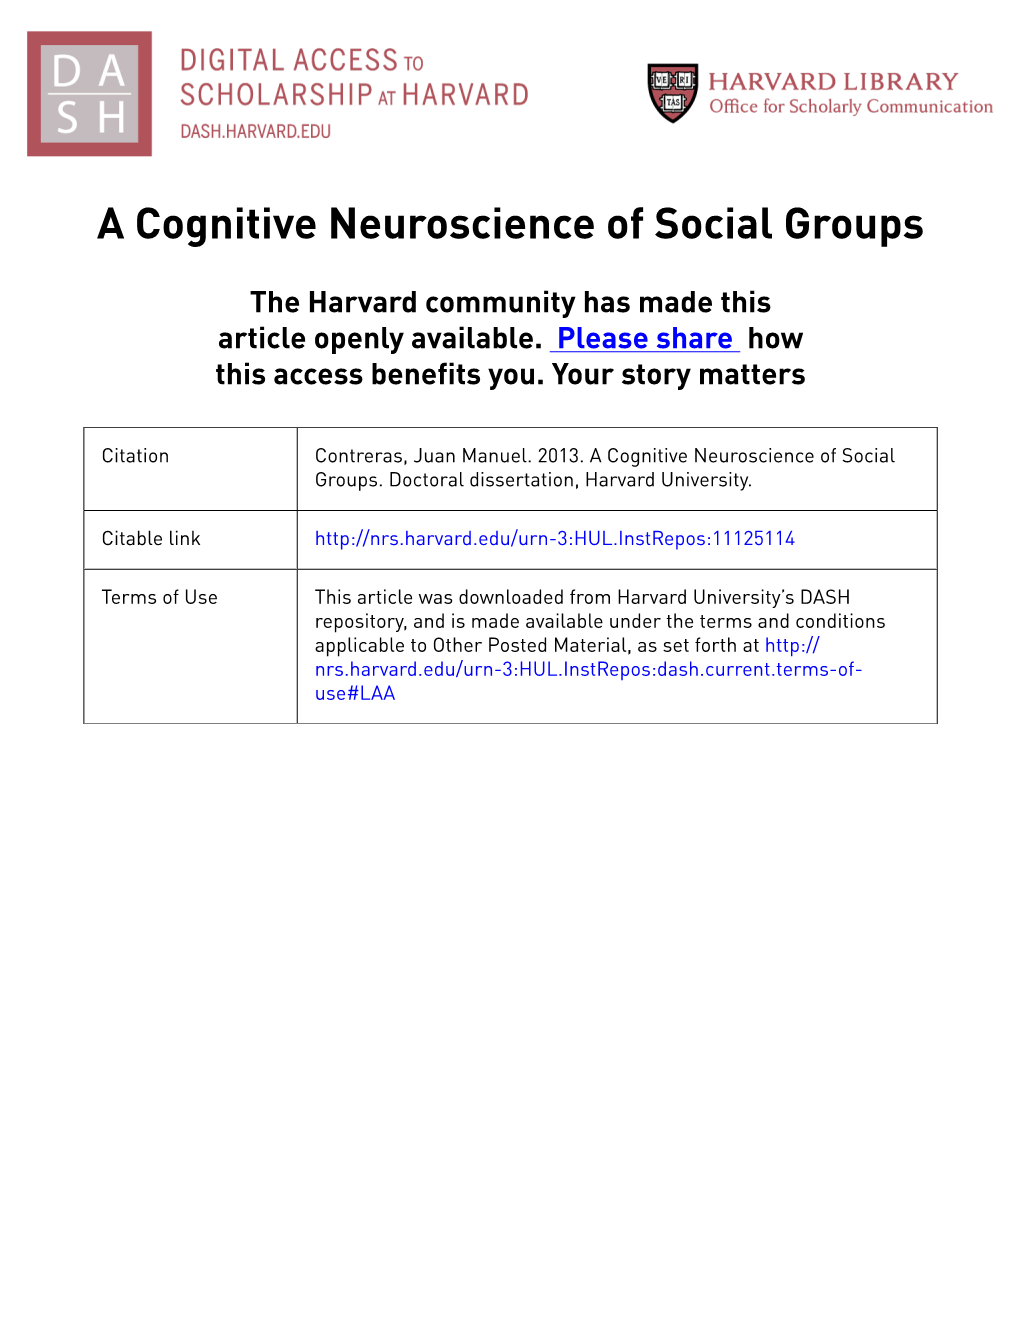 A Cognitive Neuroscience of Social Groups